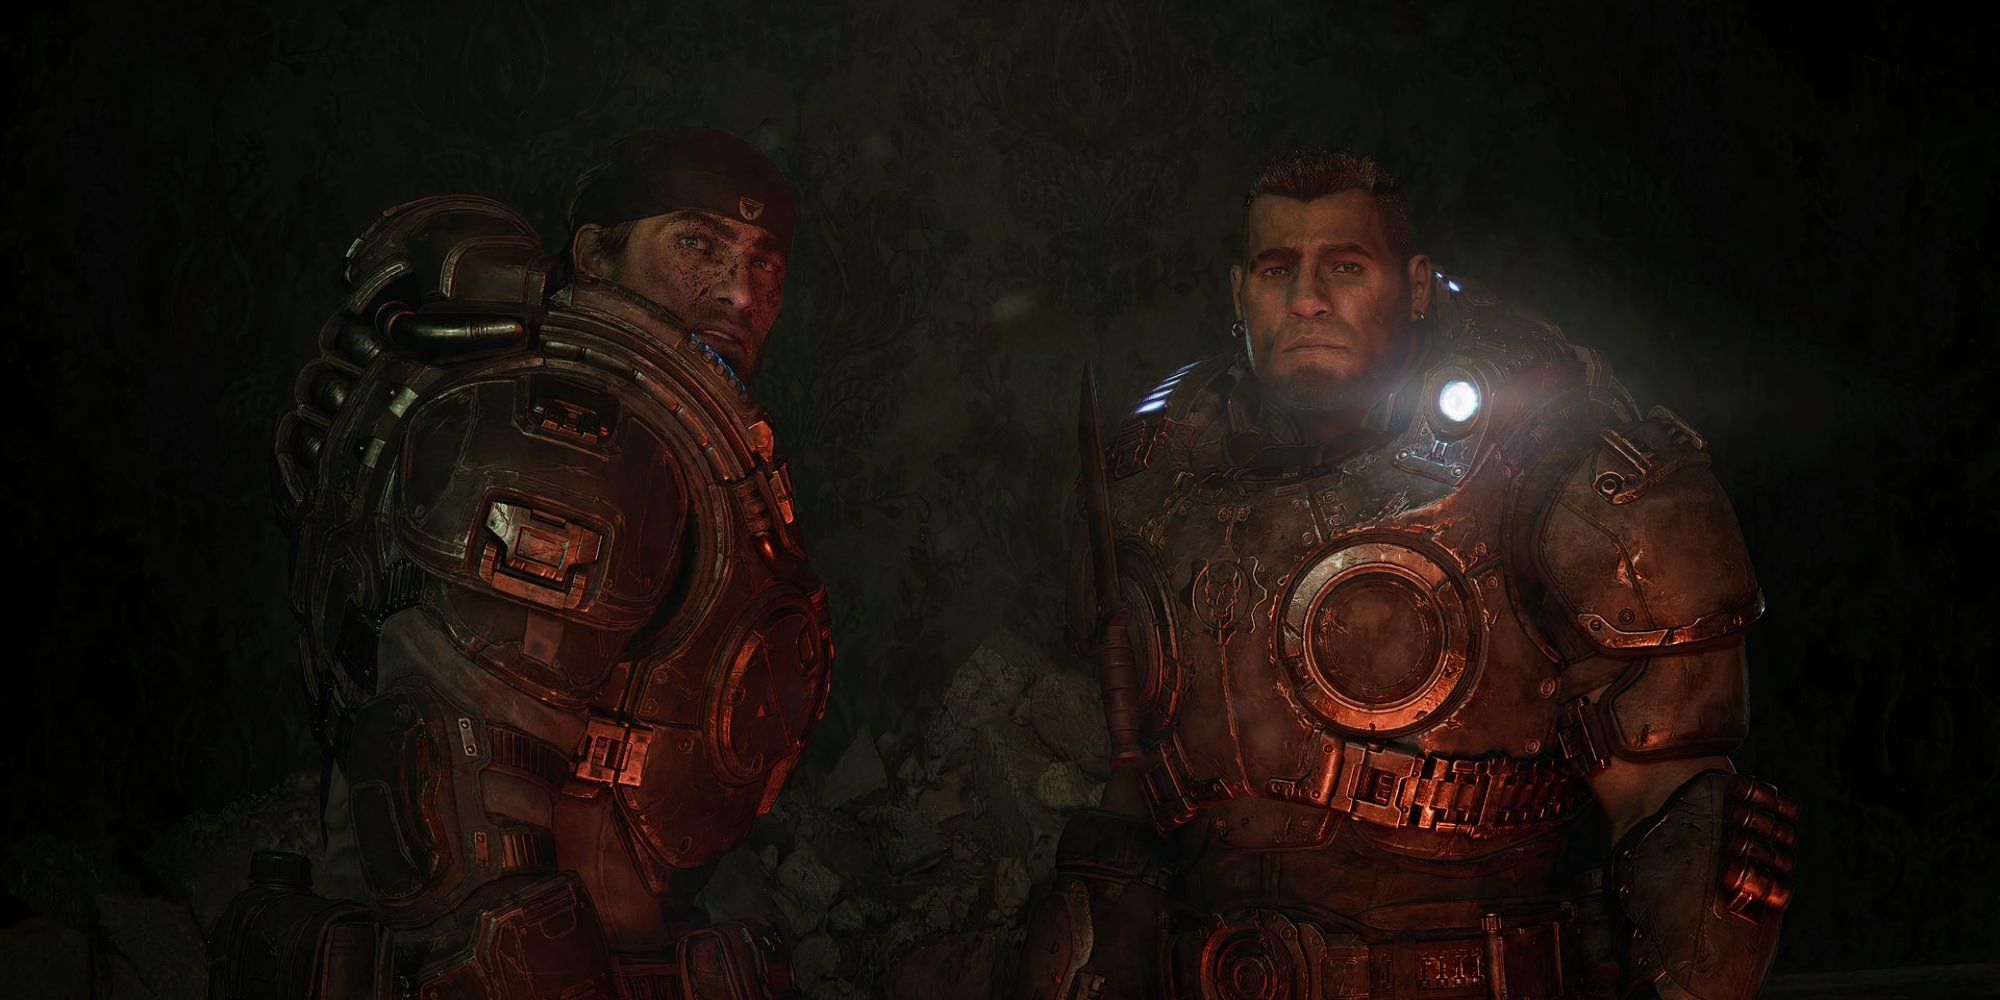 Still from the Gears of War: E-Day trailer of Marcus and Dom in armor.